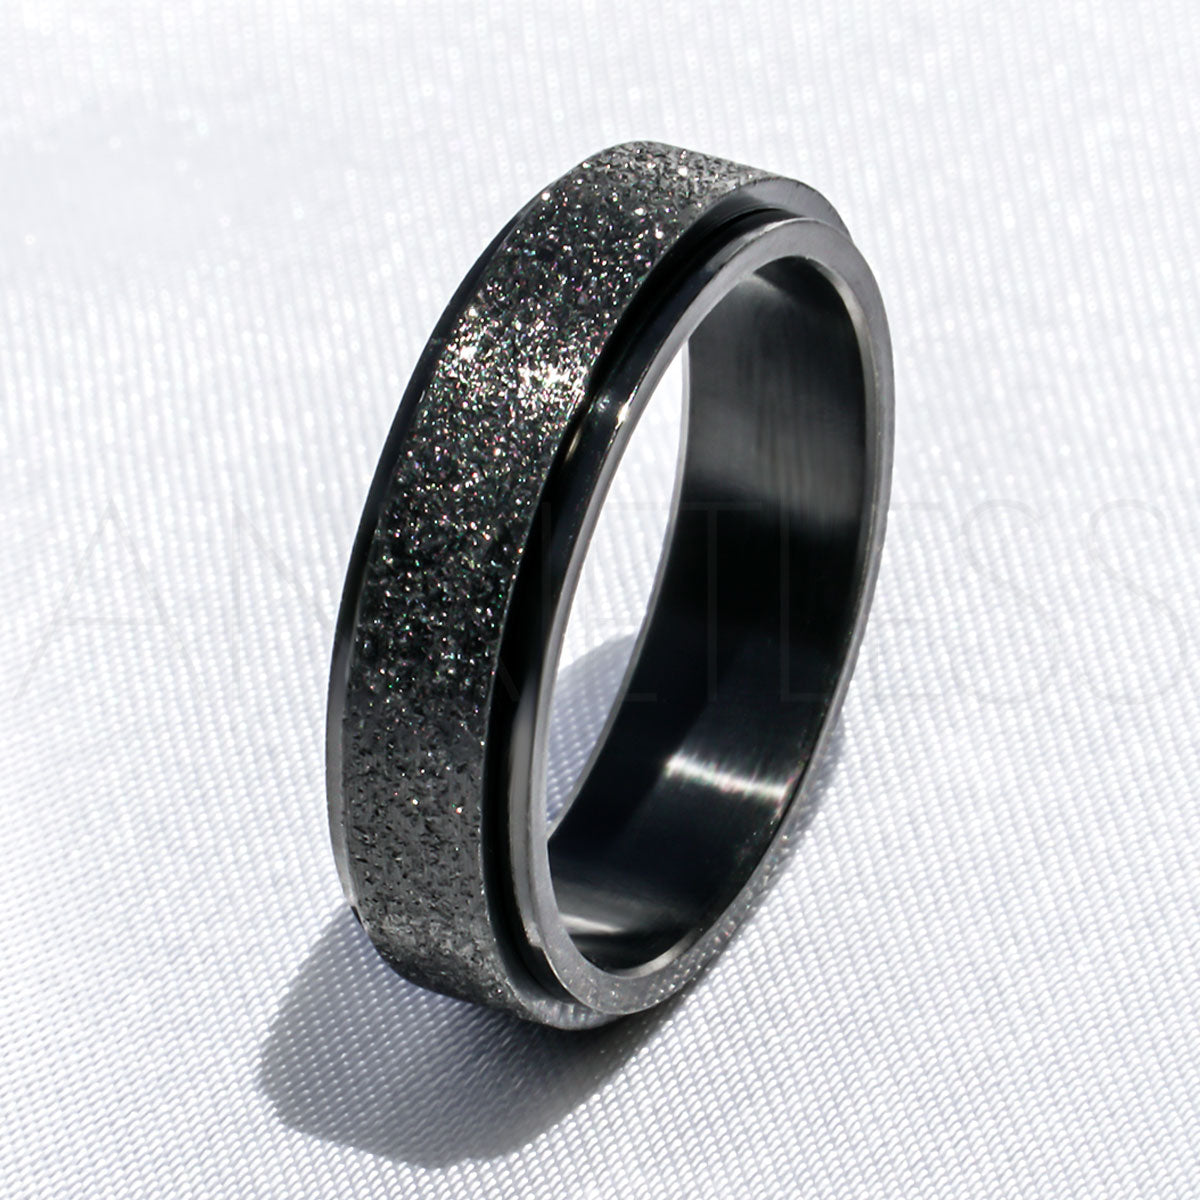 Sparkly Black Anxiety Ring on White Background